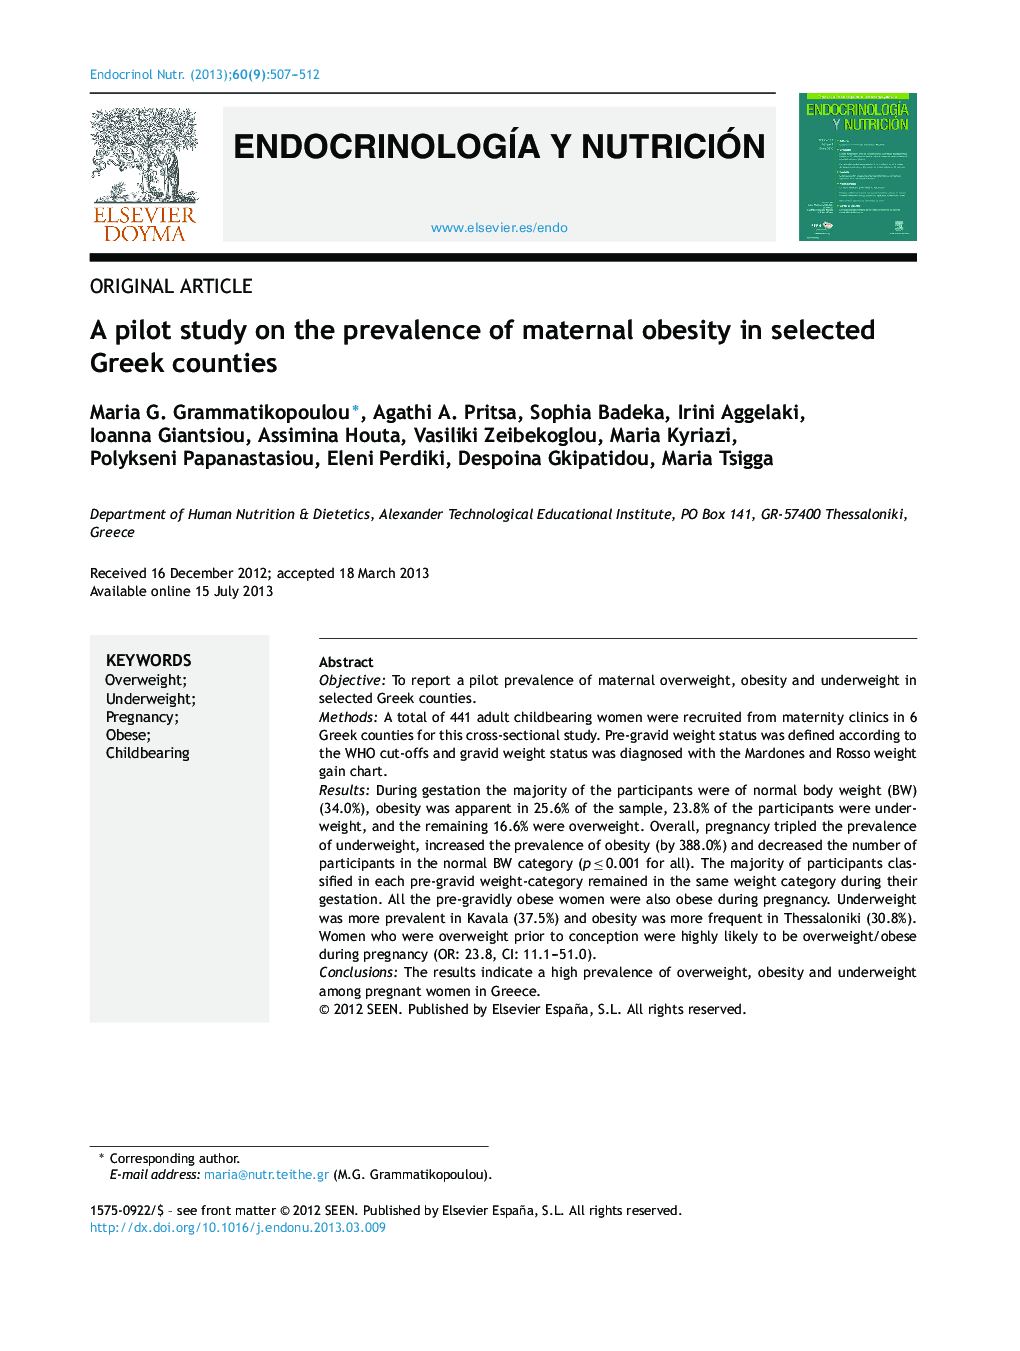 A pilot study on the prevalence of maternal obesity in selected Greek counties